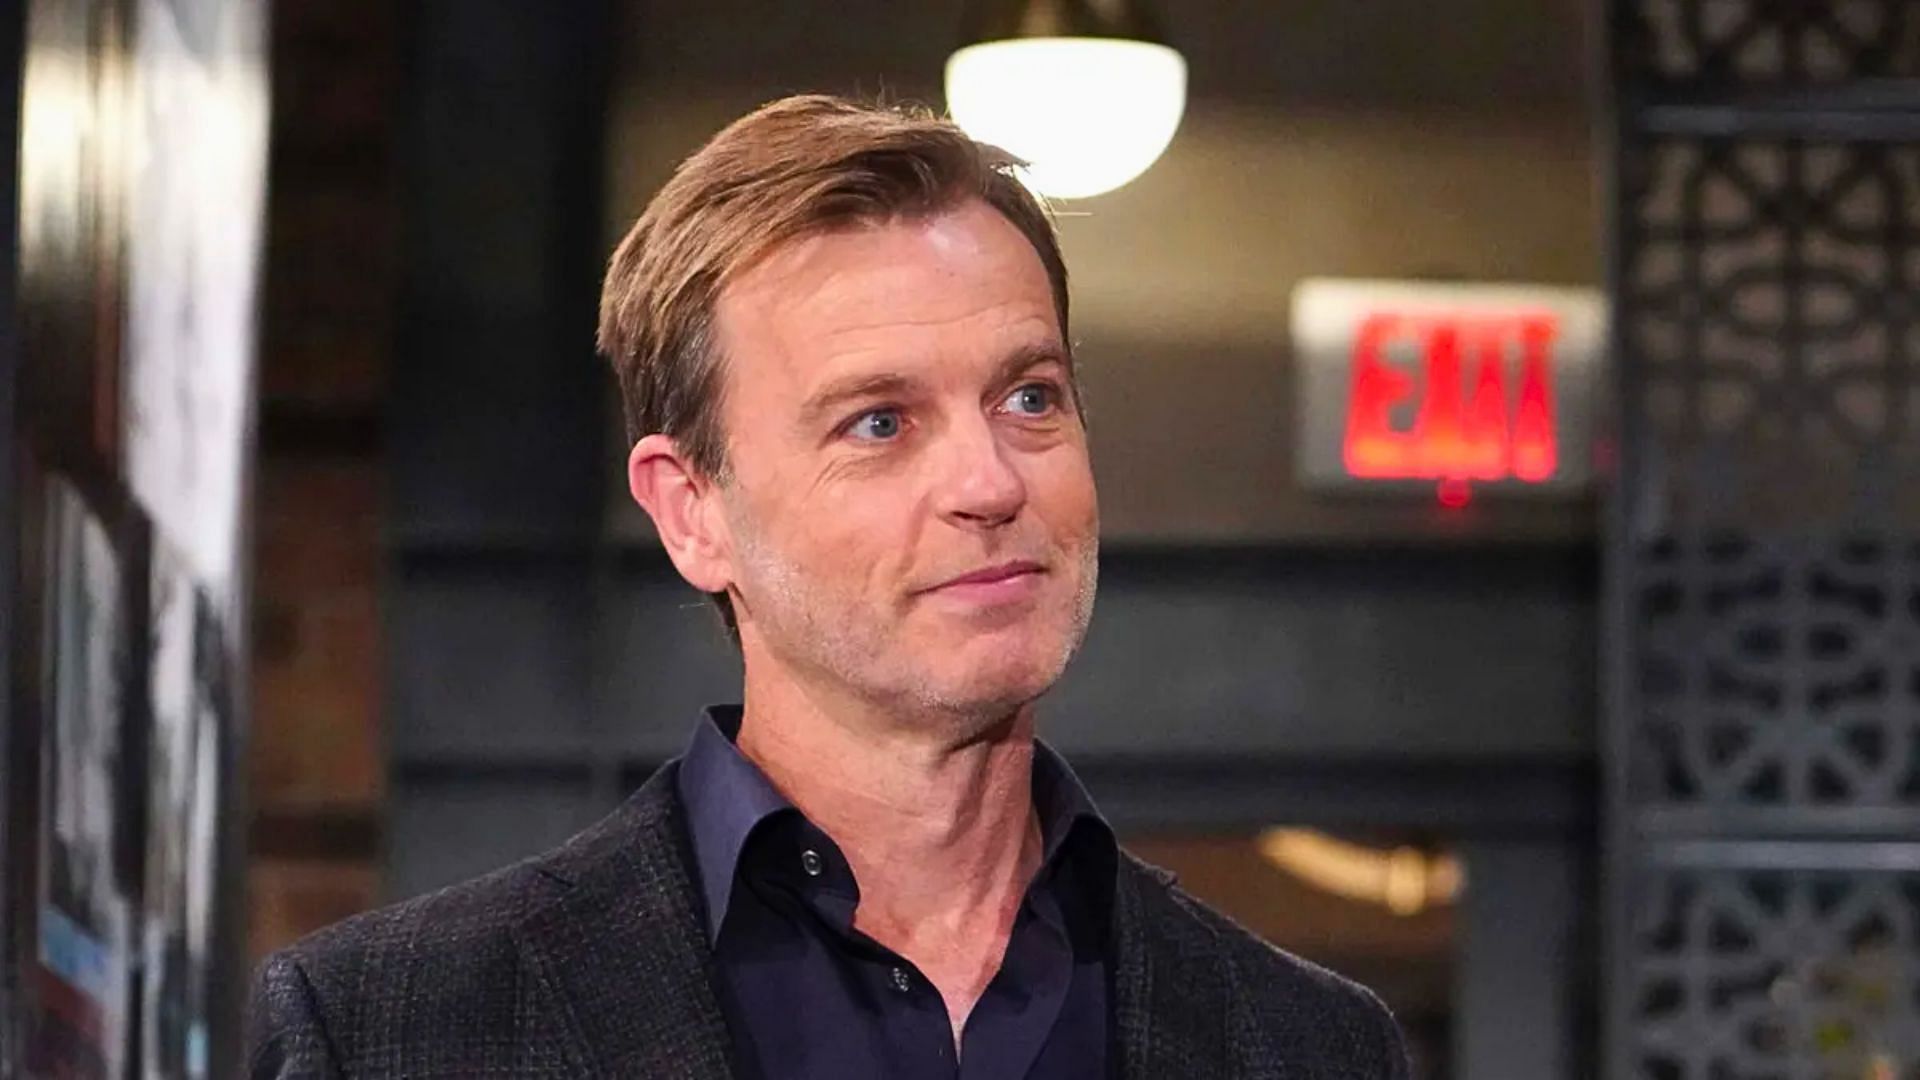 Tucker will not be leaving The Young and the Restless (Image via CBS)